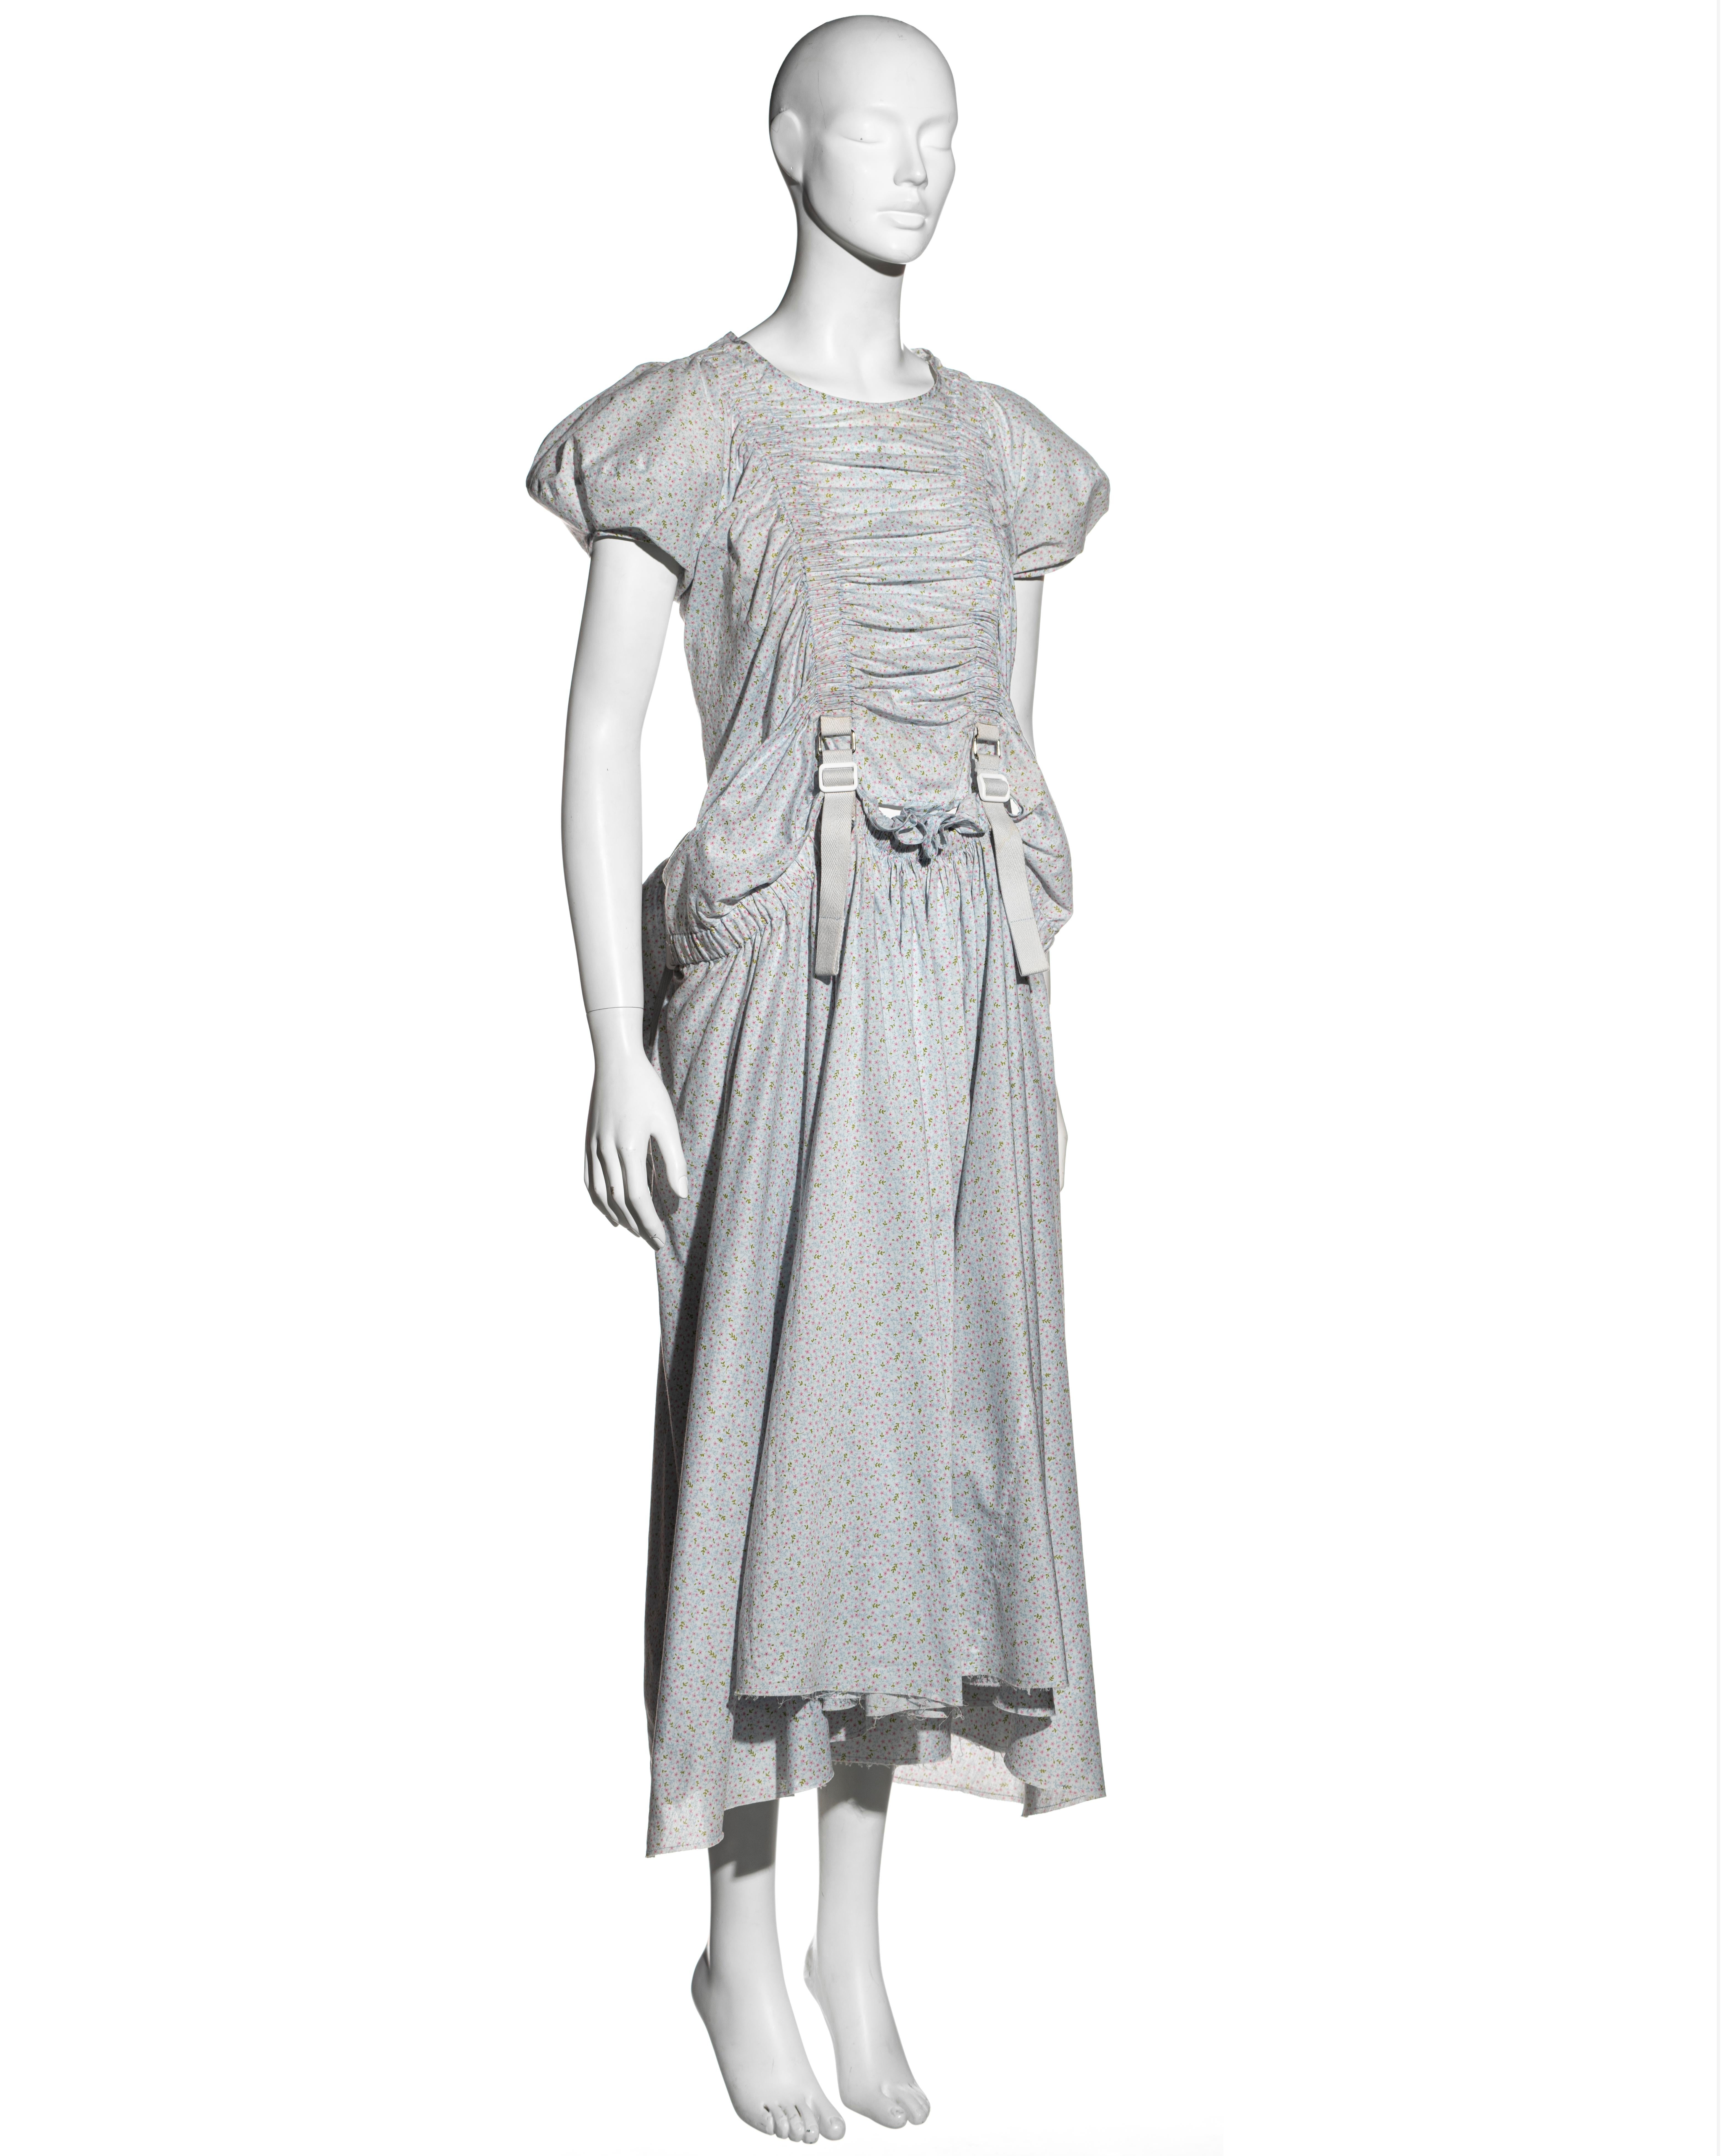 Junya Watanabe floral cotton dress with harness straps and backpack, ss 2003 For Sale 2